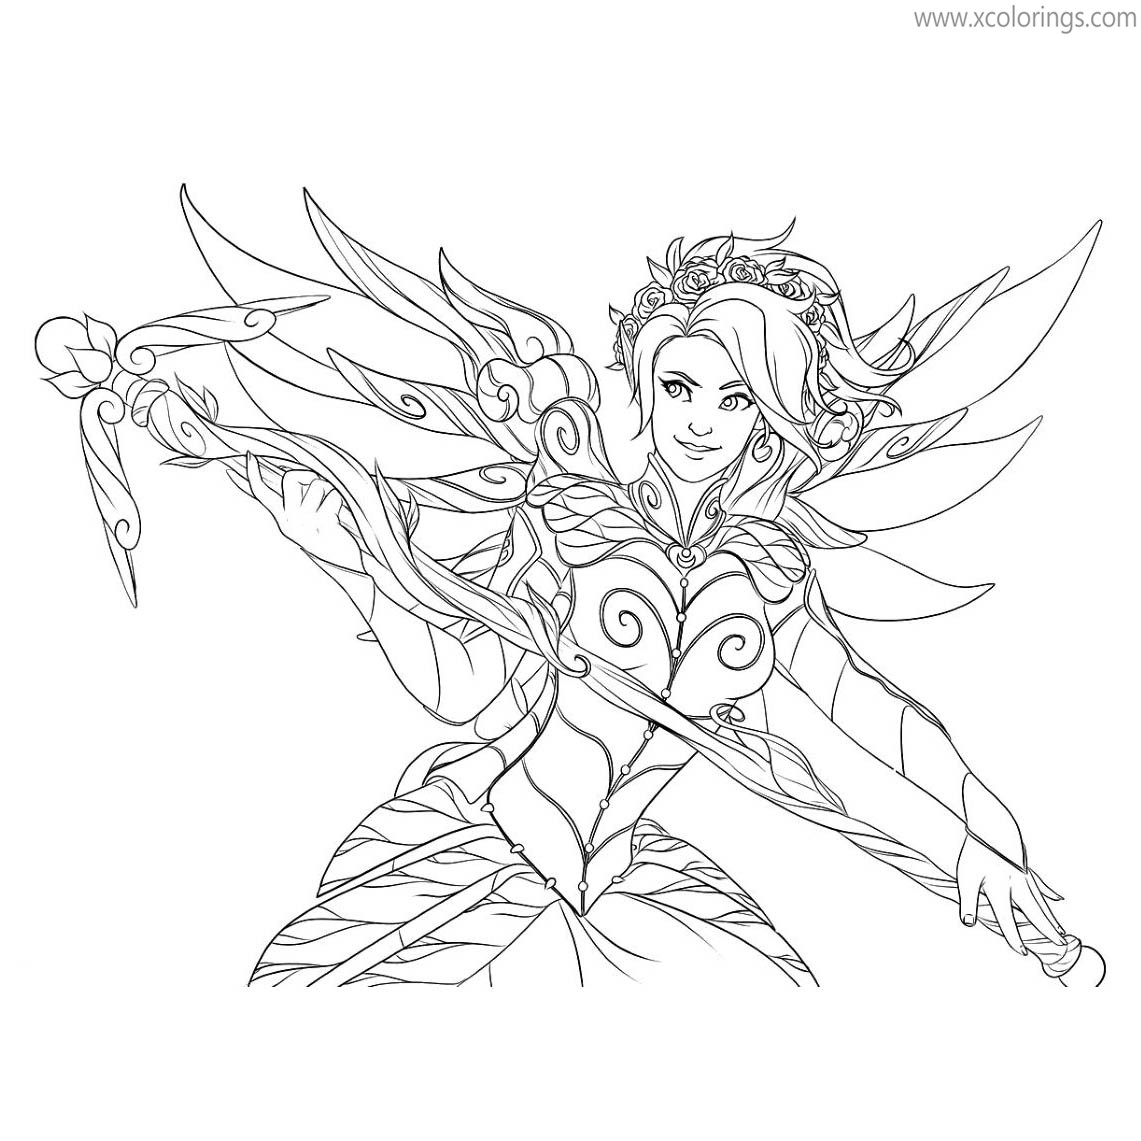 Free Overwatch Coloring Pages Tracer Lena Oxton printable